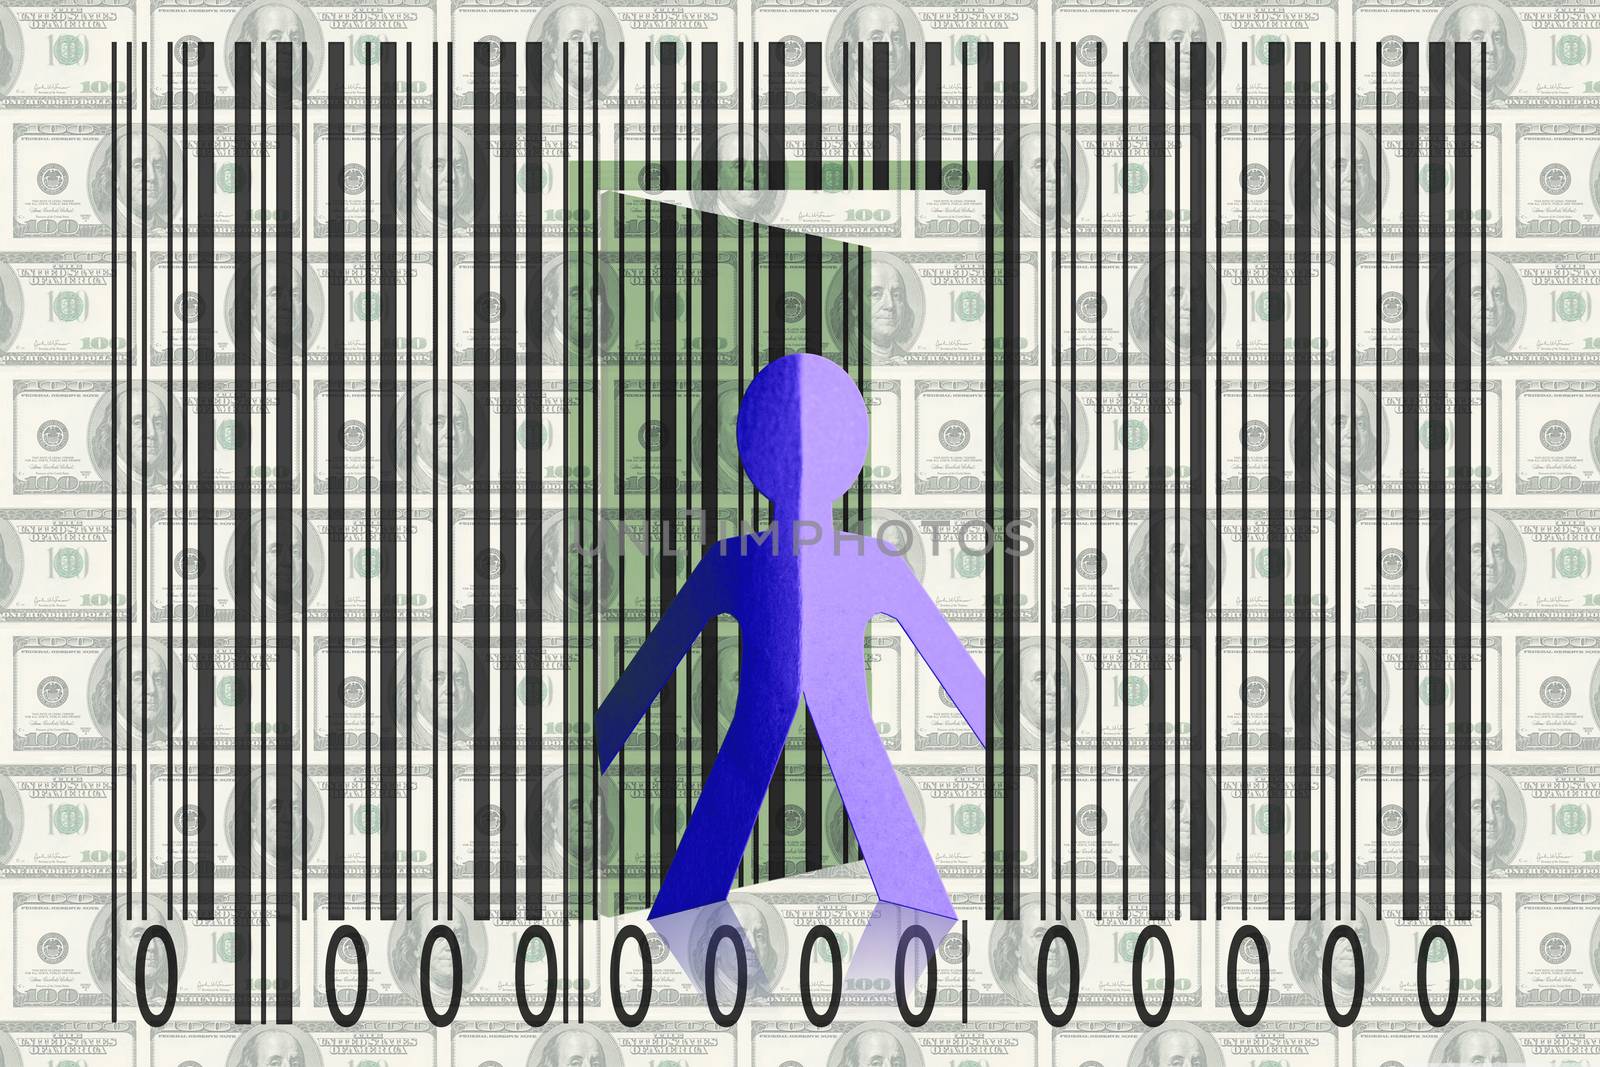 Paperman coming out of a bar code with Dollars as Backround